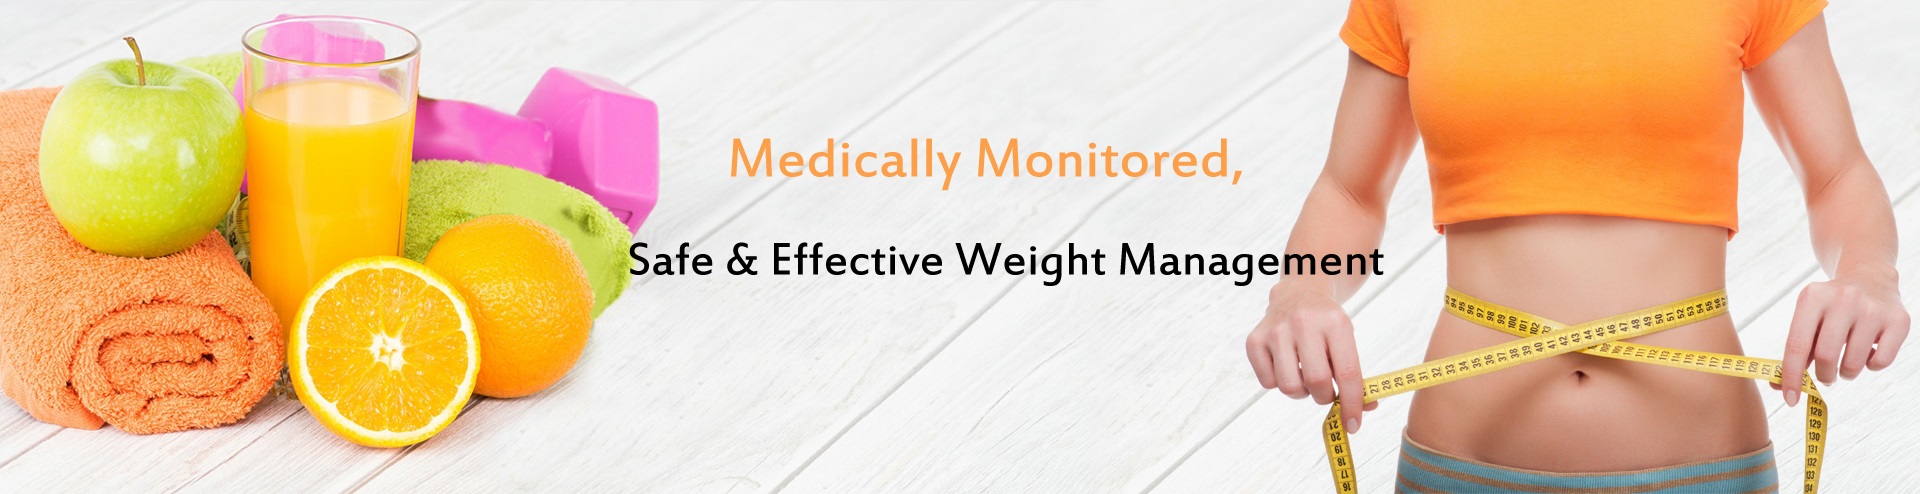 Medically Monitored, Safe & Effective Weight Management